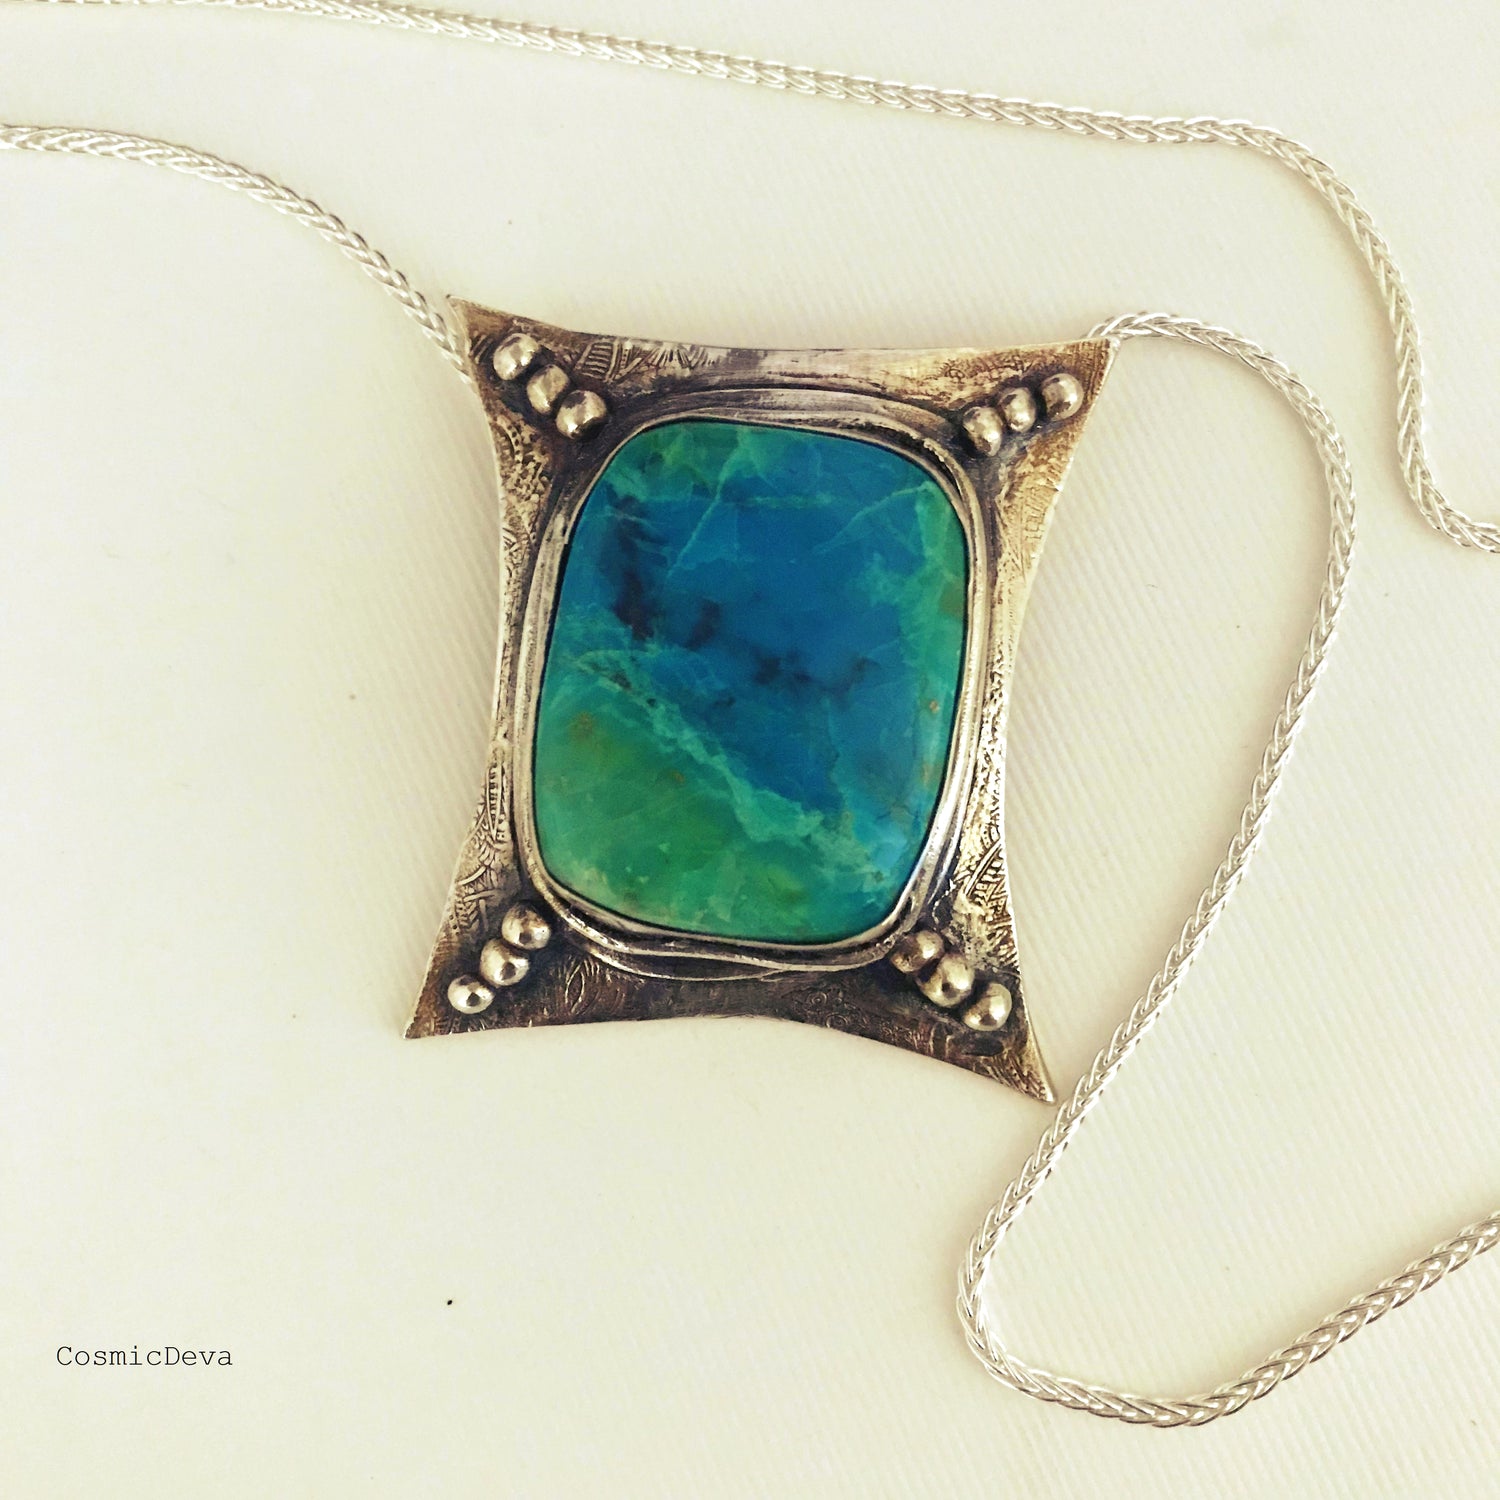 One of a kind fully handmade sterling silver art jewelry necklace with a spectacular vibrant blue green Chrysocolla (a.k.a "Peruvian Turquoise") stone.